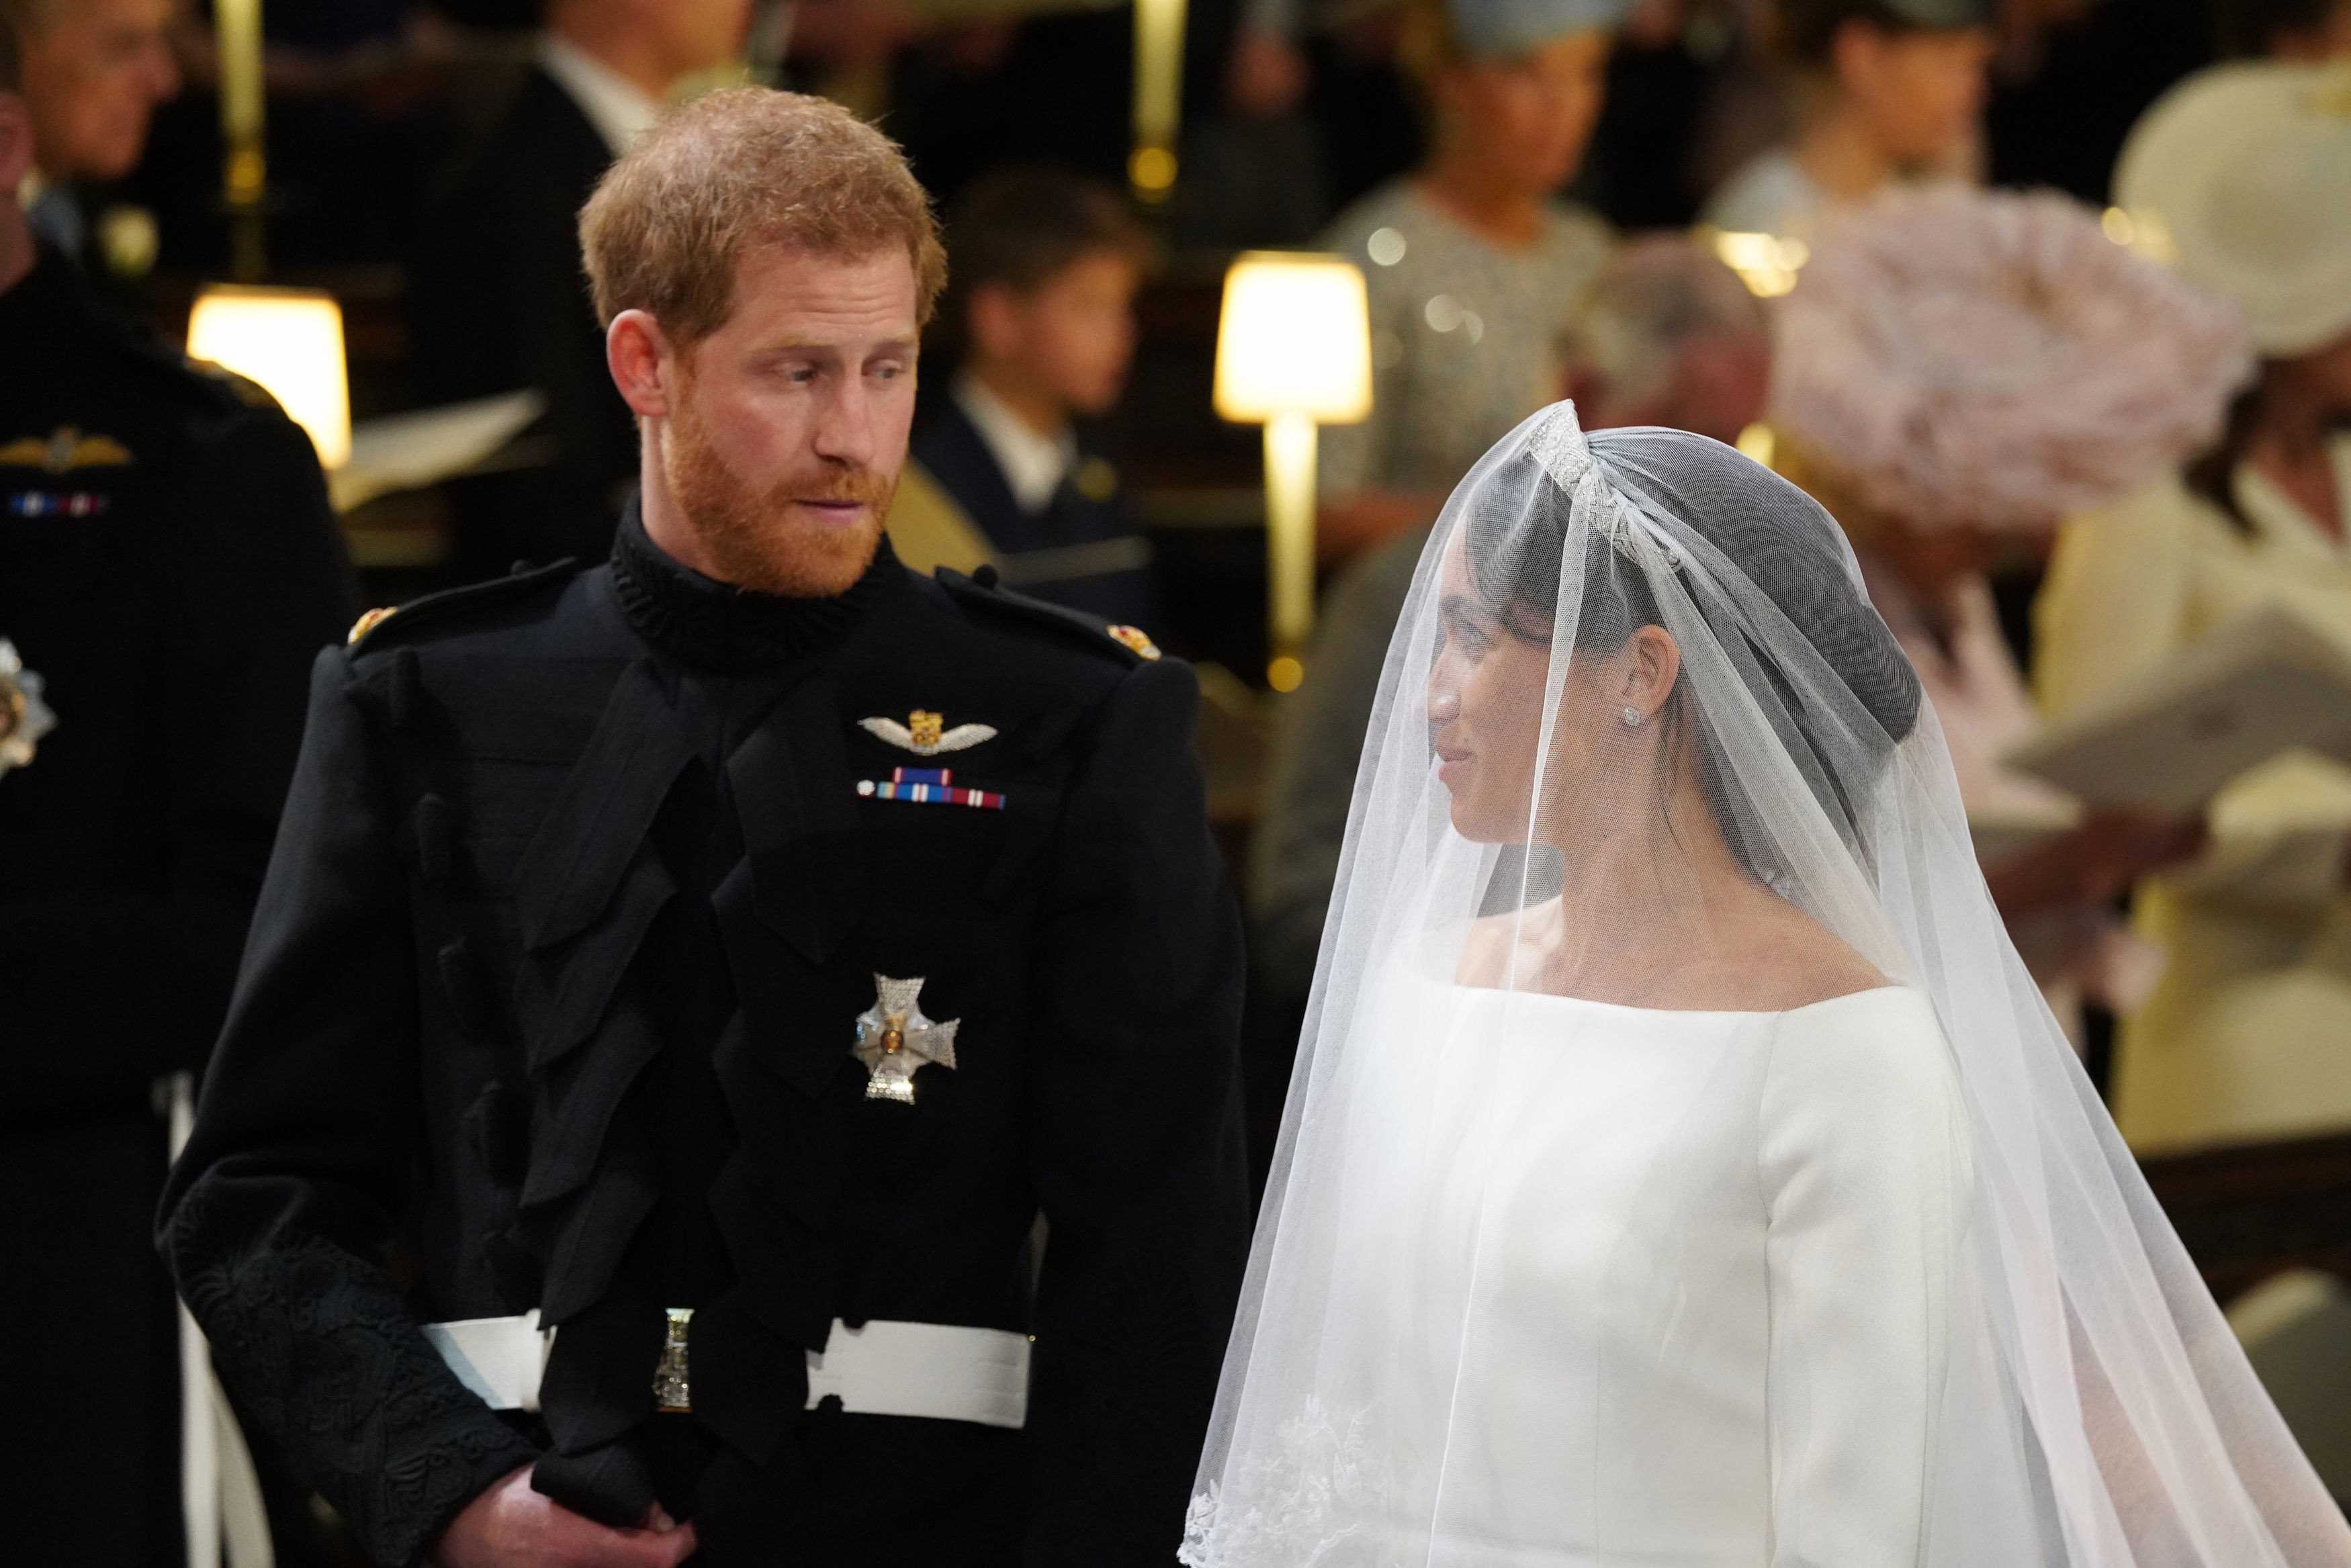 Prince Harry with Meghan Markle during their wedding in St George's Chapel at Windsor Castle on May 19, 2018 in Windsor, England | Source: Getty Images